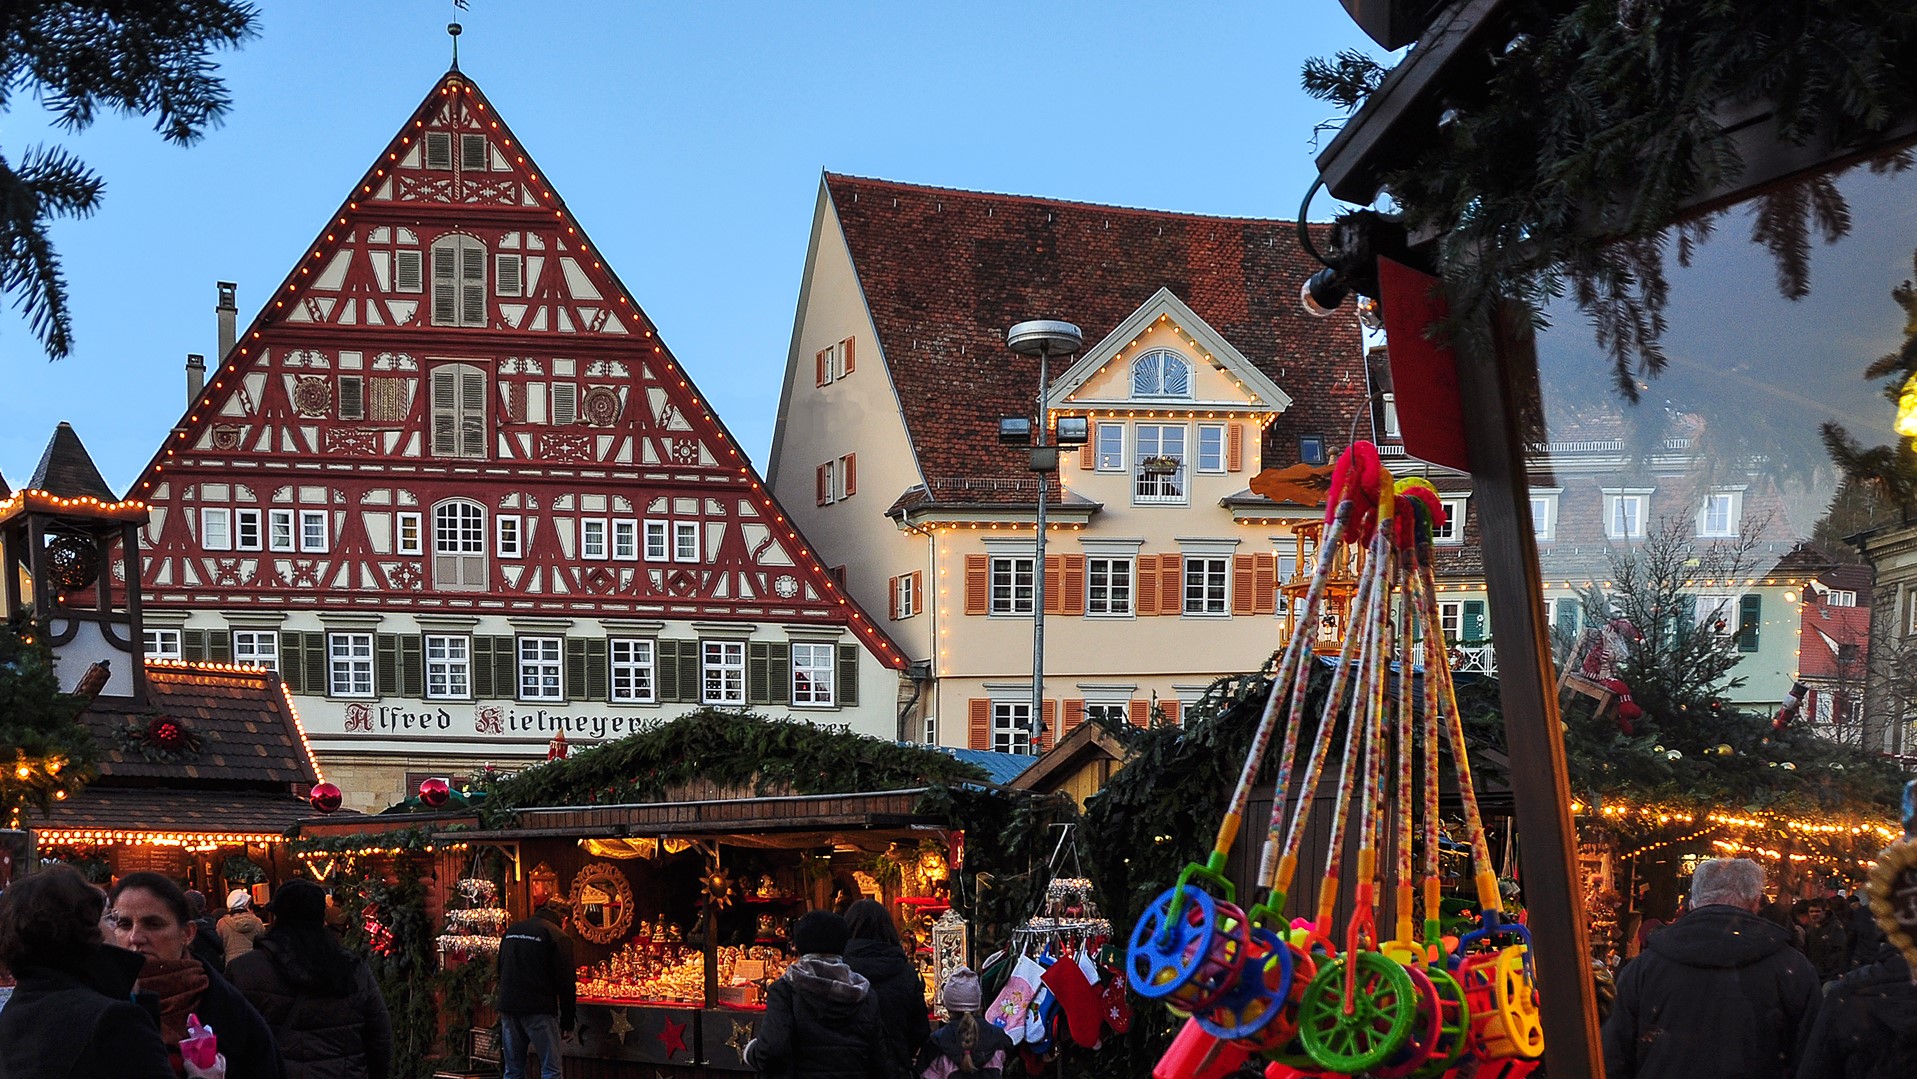 You are currently viewing Weihnachts- & Mittelaltermarkt 08/12/2019